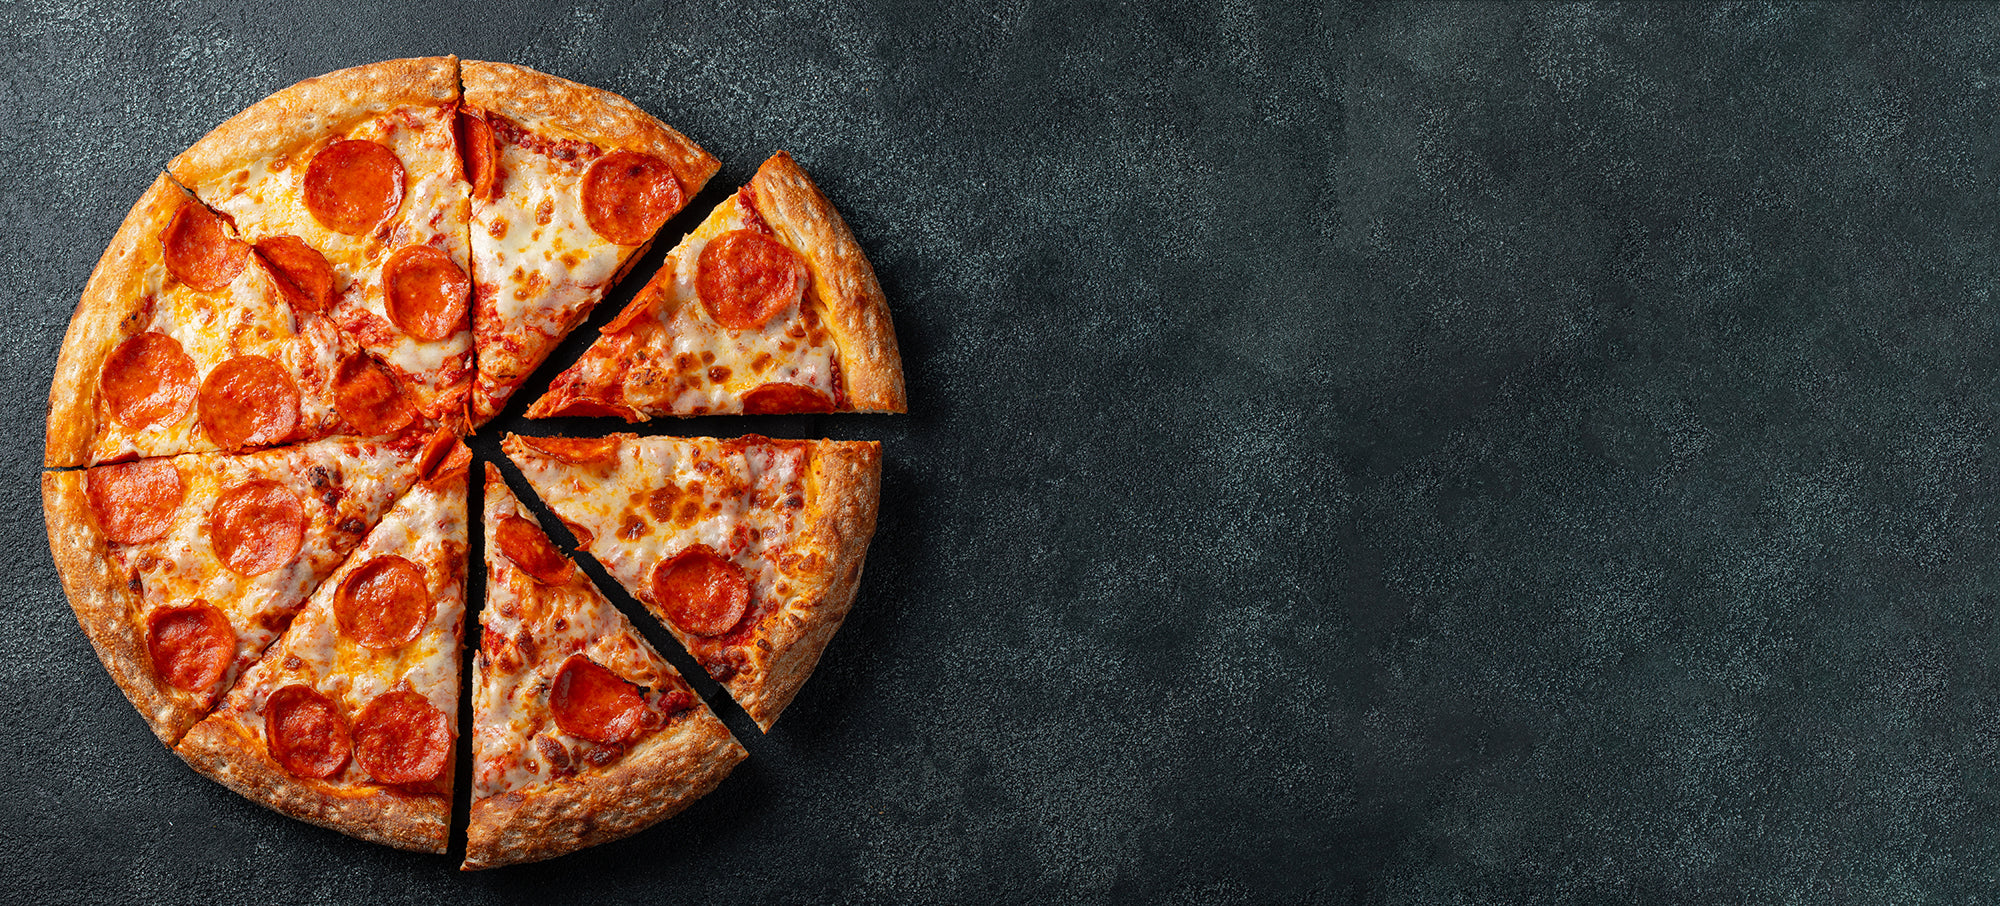 Delicious looking pepperoni pizza on a dark background